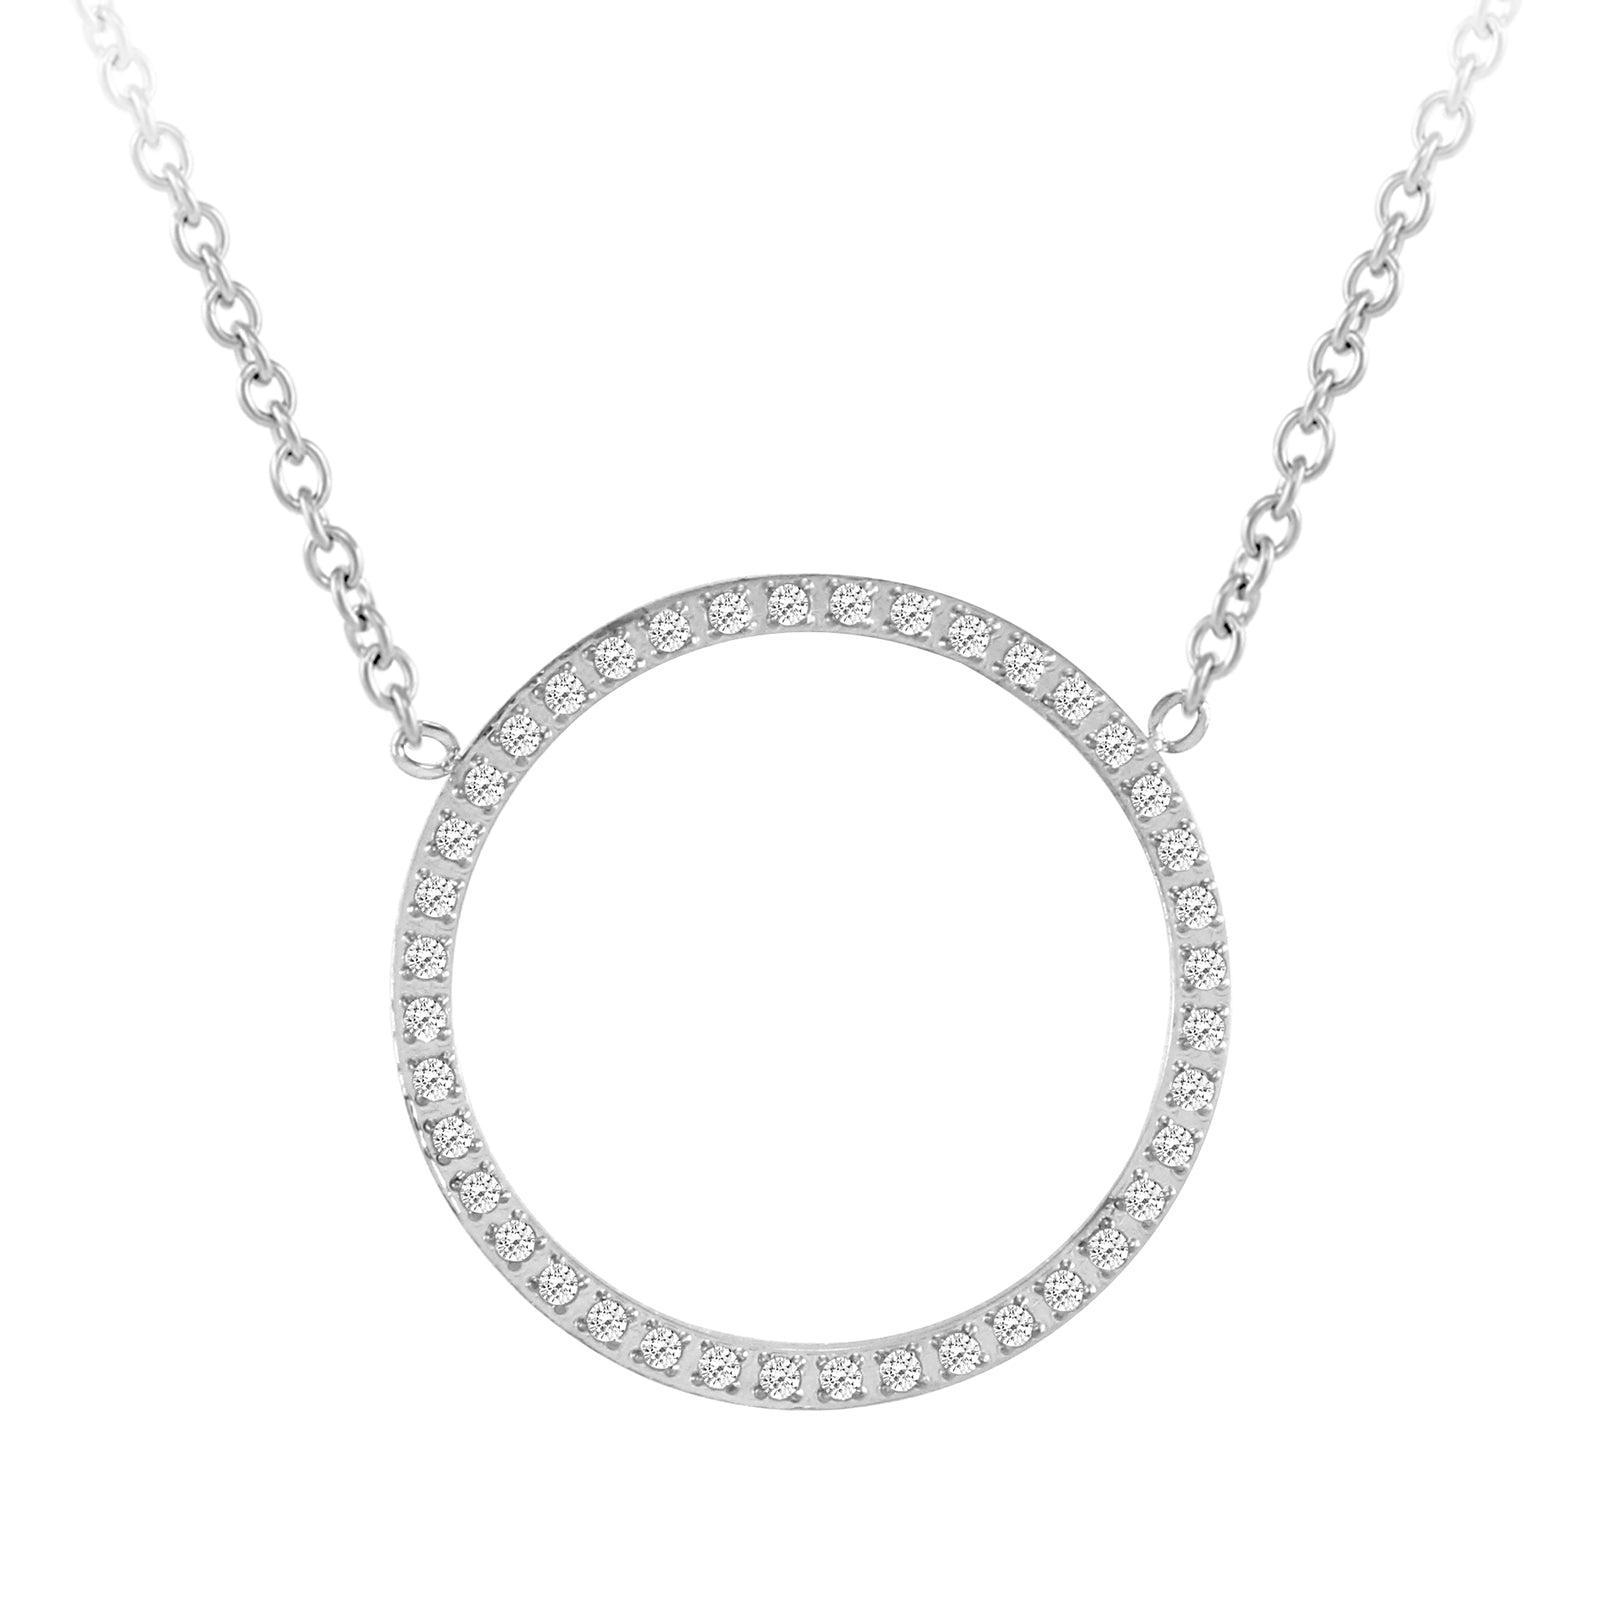 MNC-P664-A Stainless Steel Circle Necklace